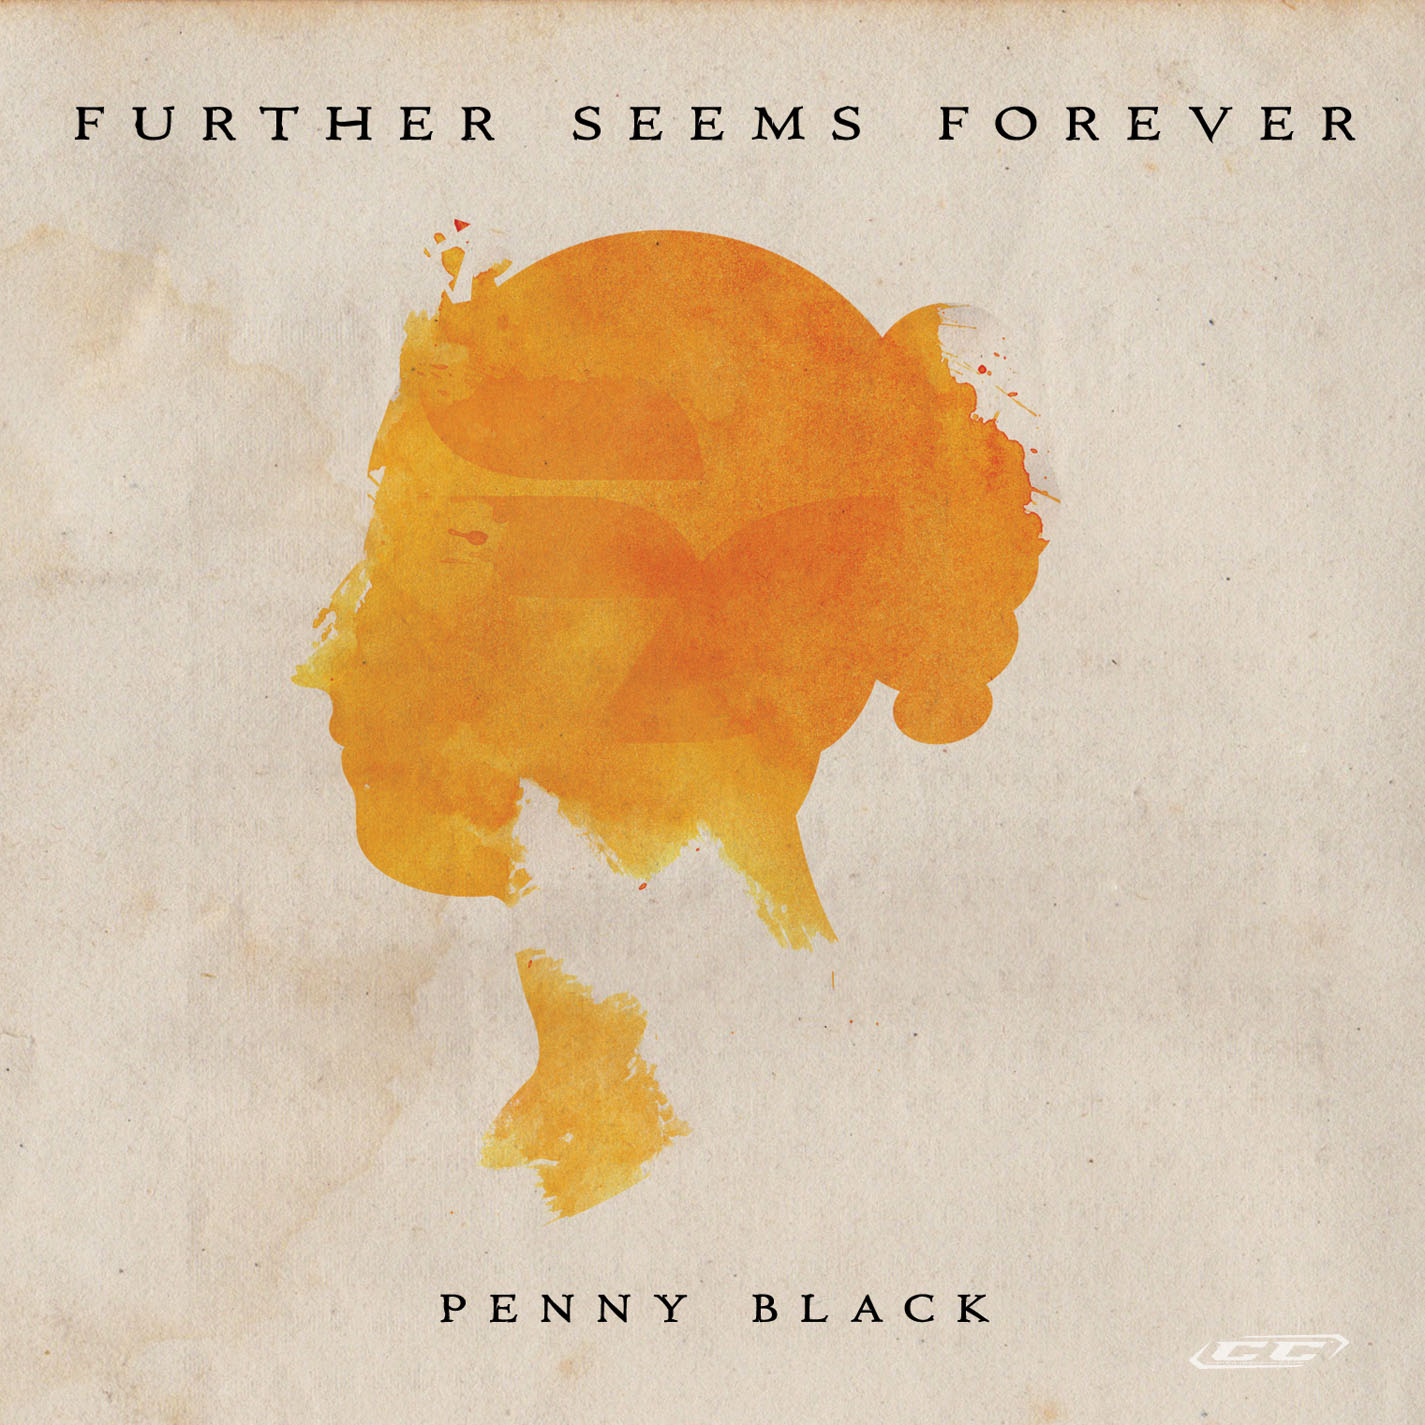 Further Seems Forever - Penny Black 2012 English Christian Album Download